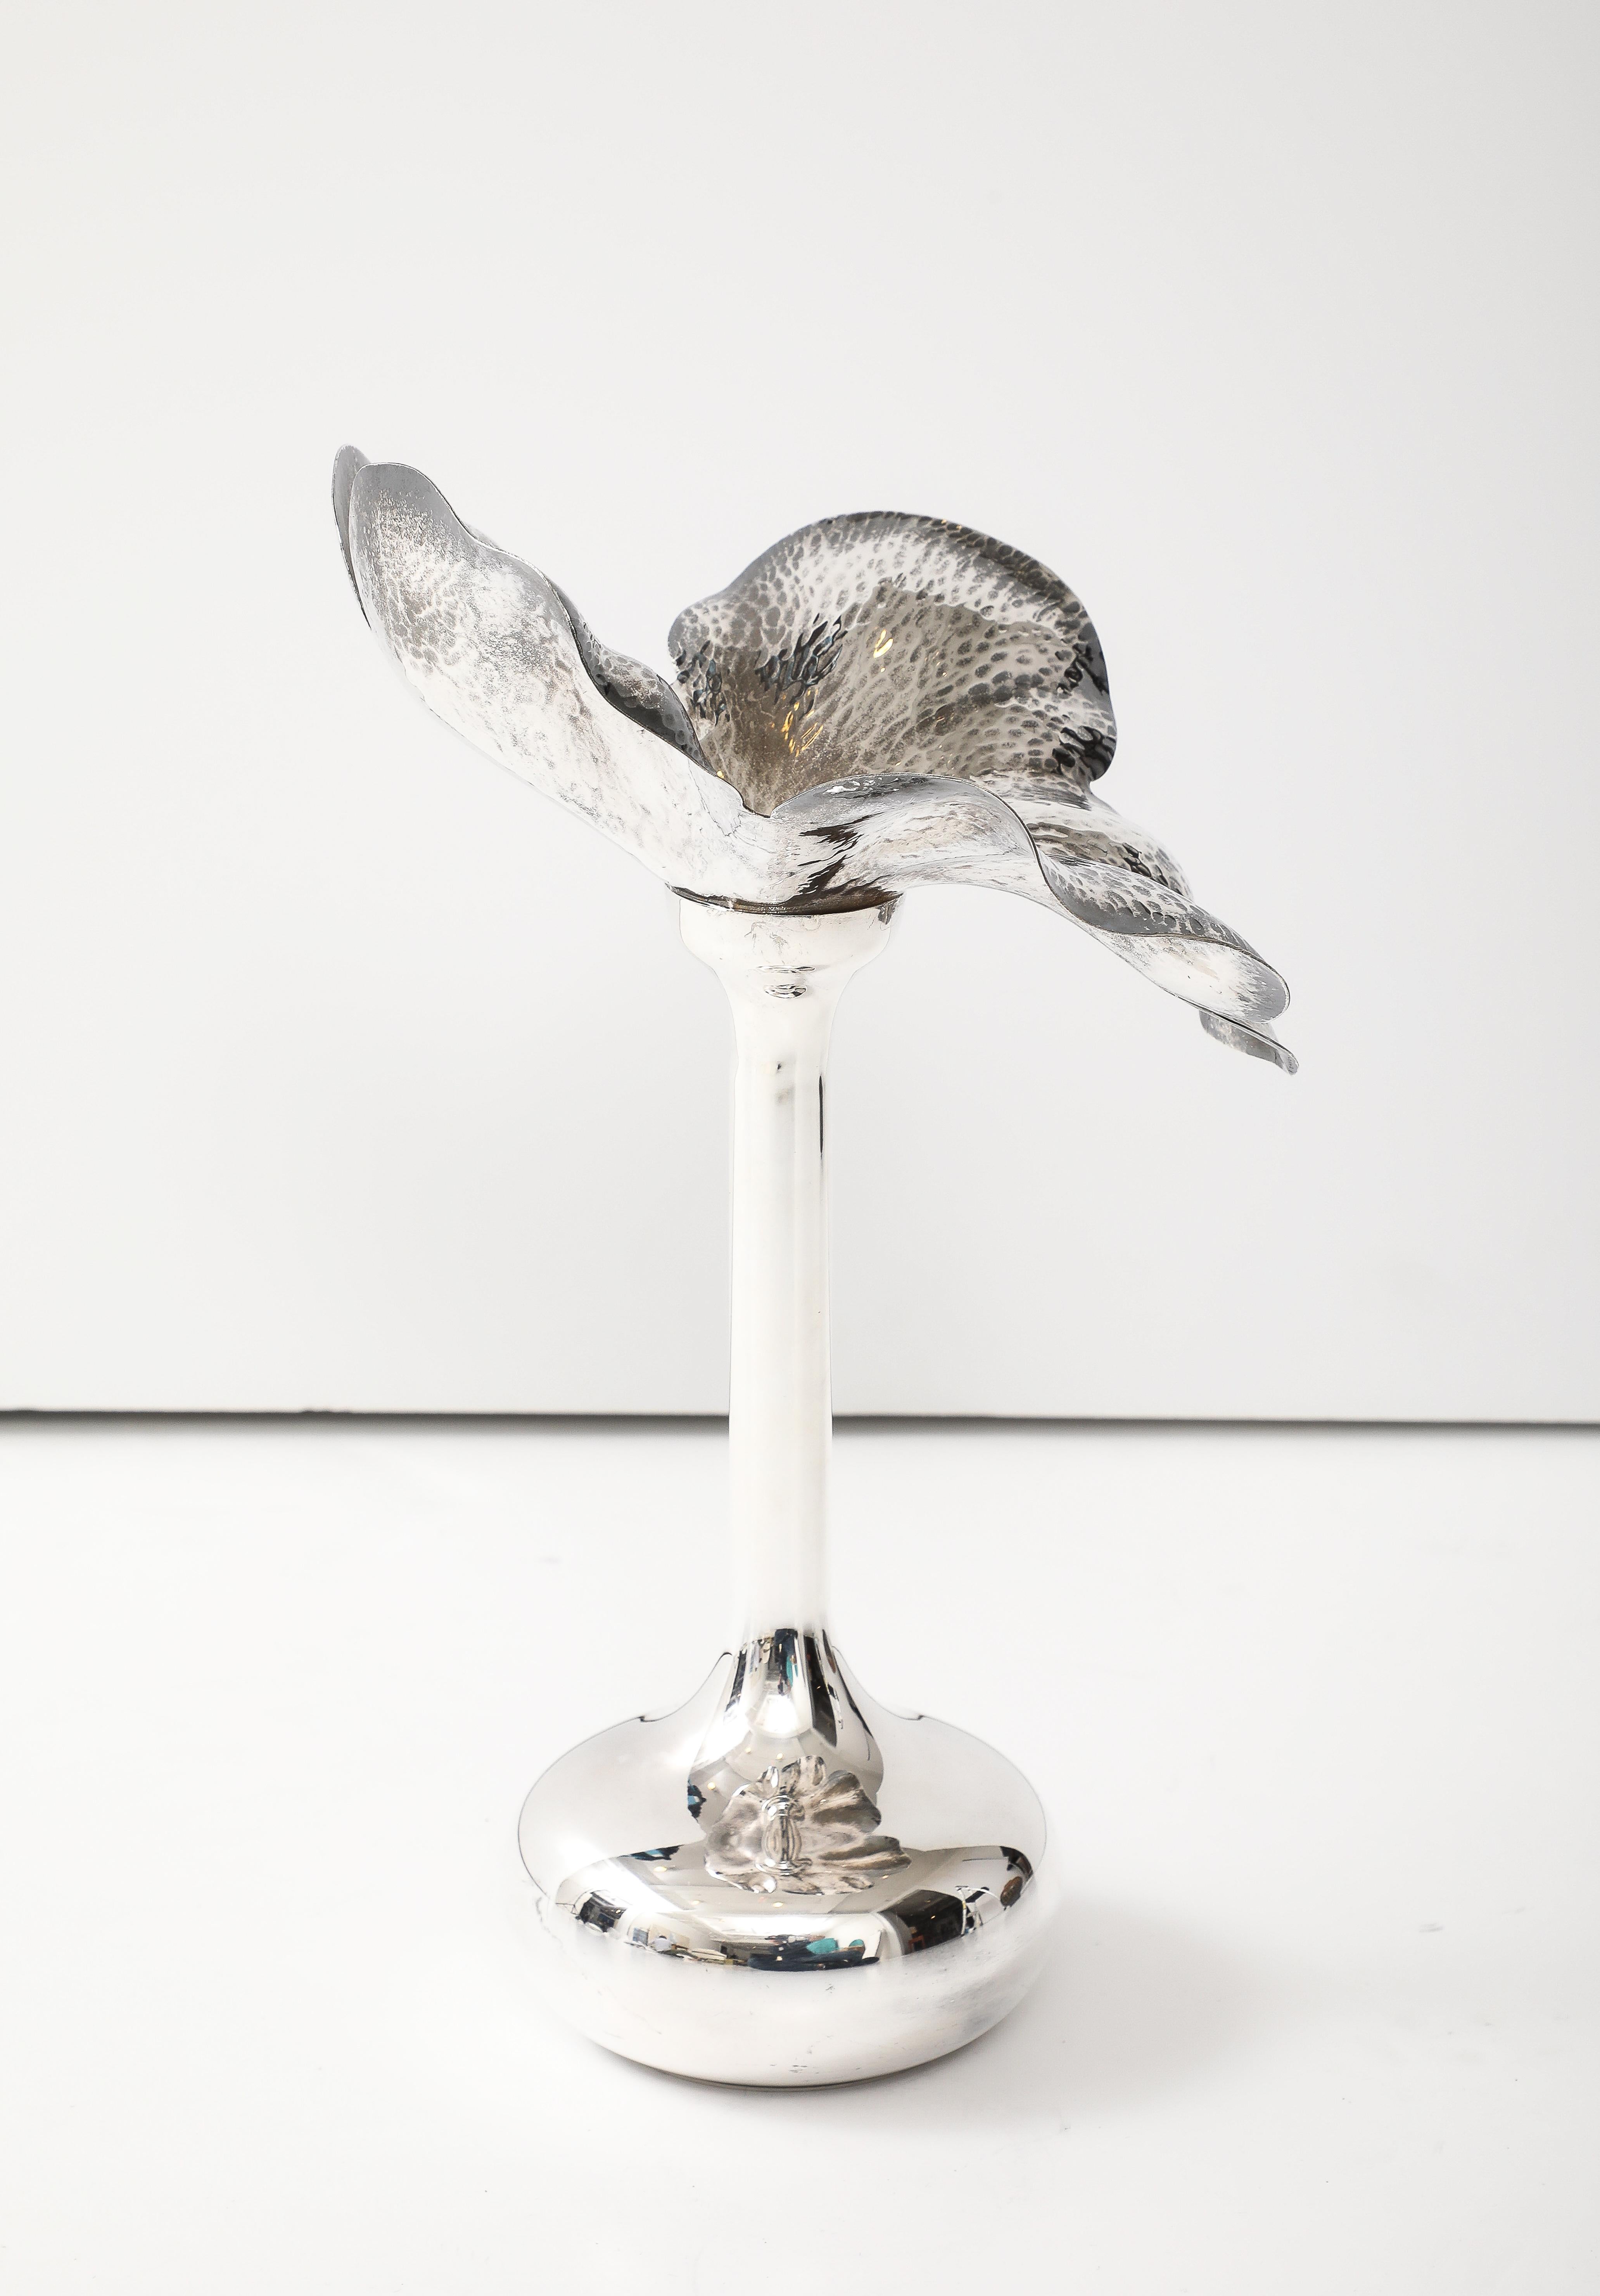 1970's modern flower shape silver-plated Brazilian vase/candle holder attributed to Marilena Mariotto, newly hand polished with minor wear and patina due to age and use.